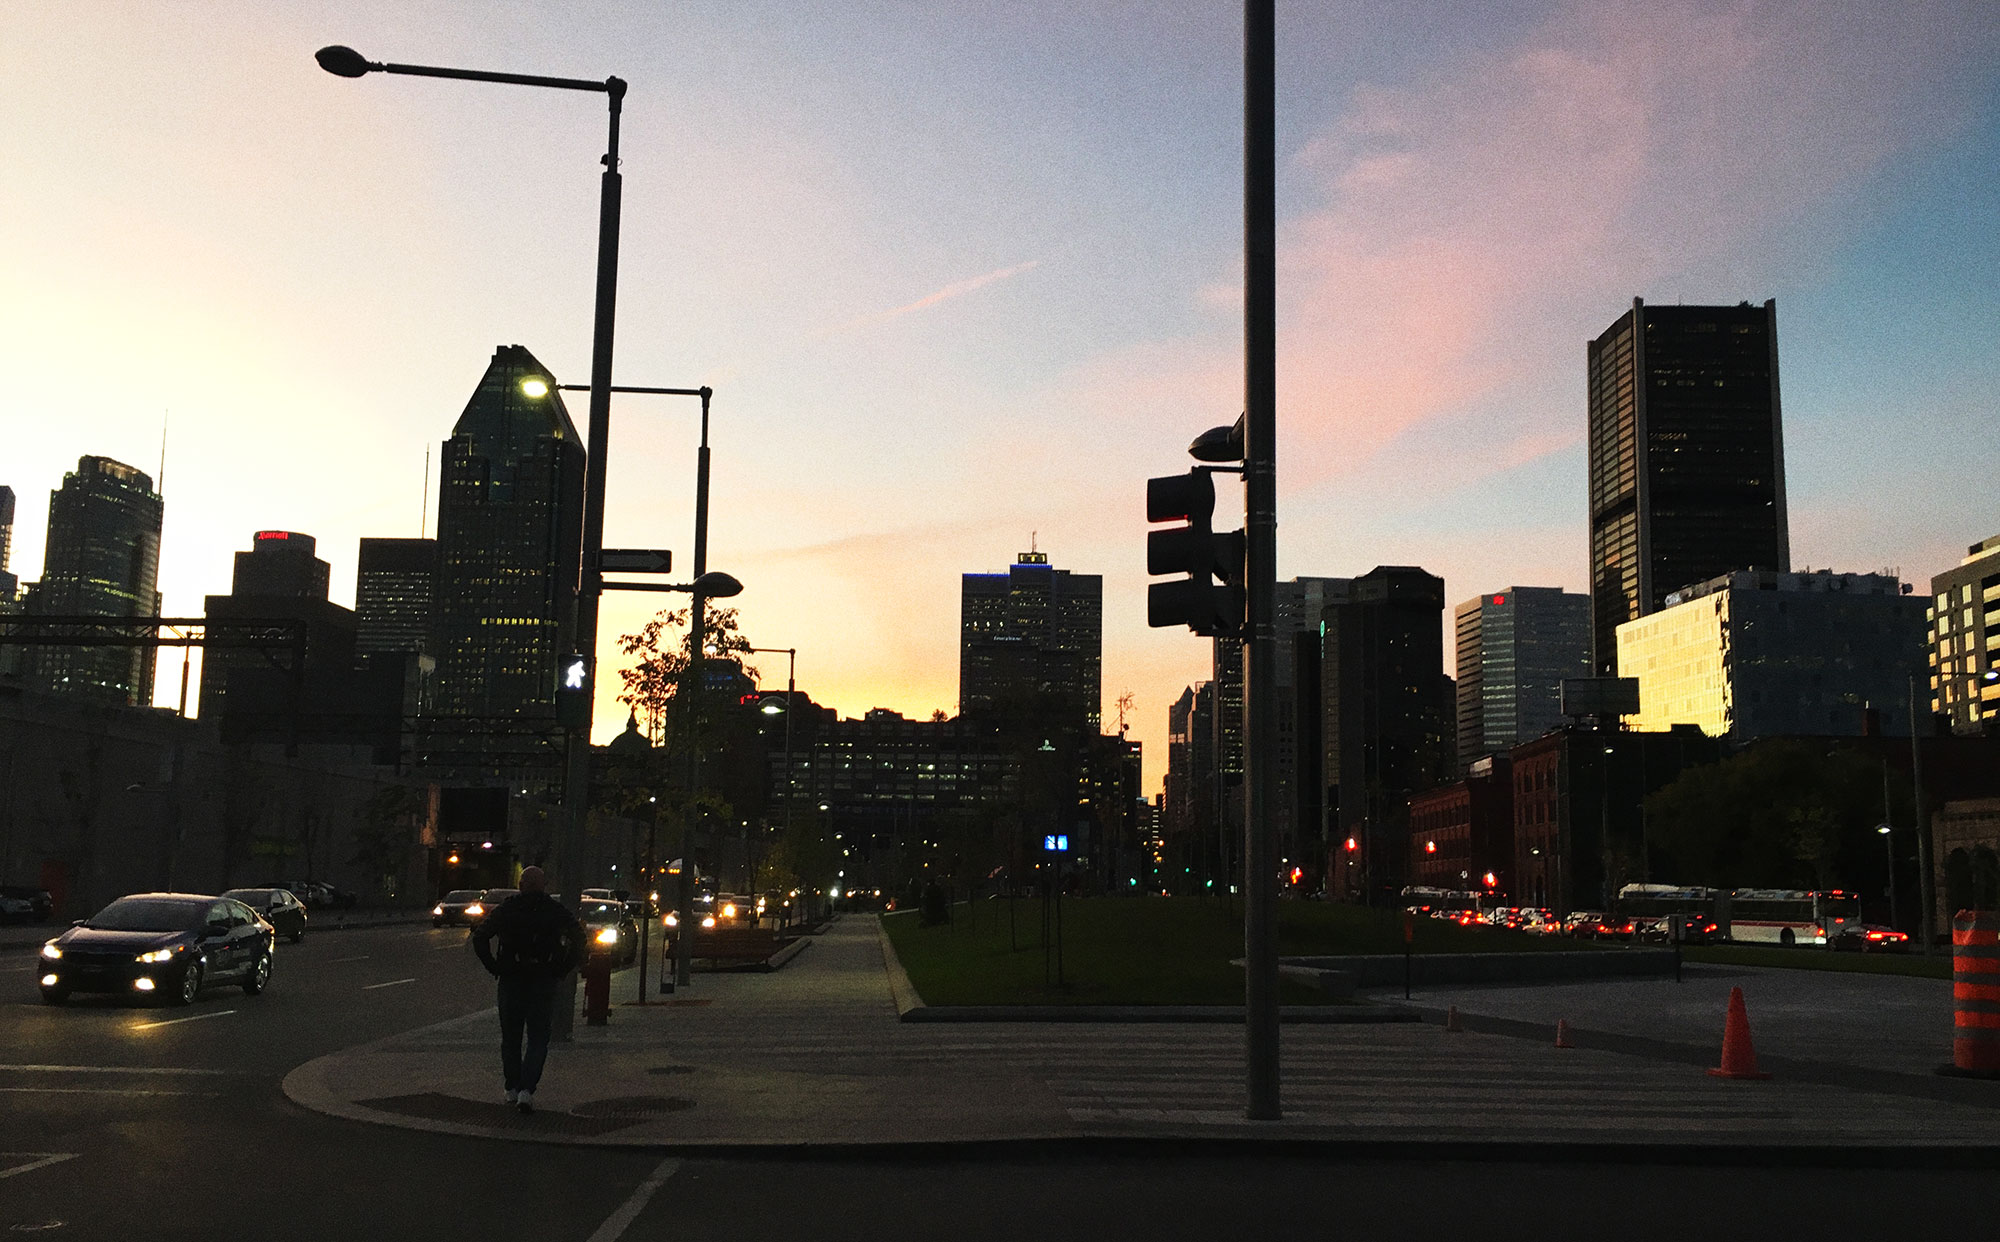 Montreal at Dusk, October 2017